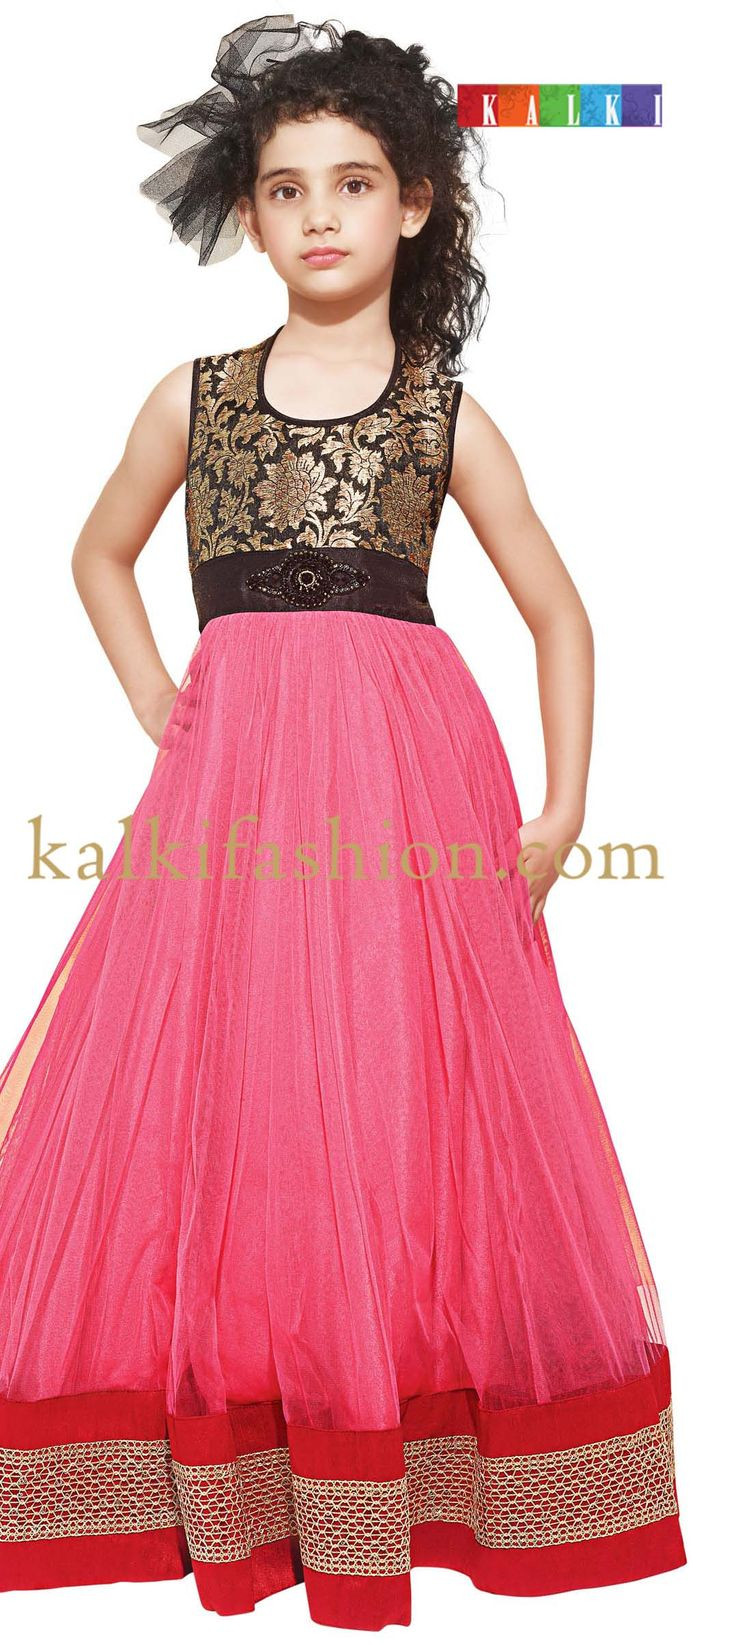 Kids Party Dresses India
 17 Best images about Kids dresses on Pinterest